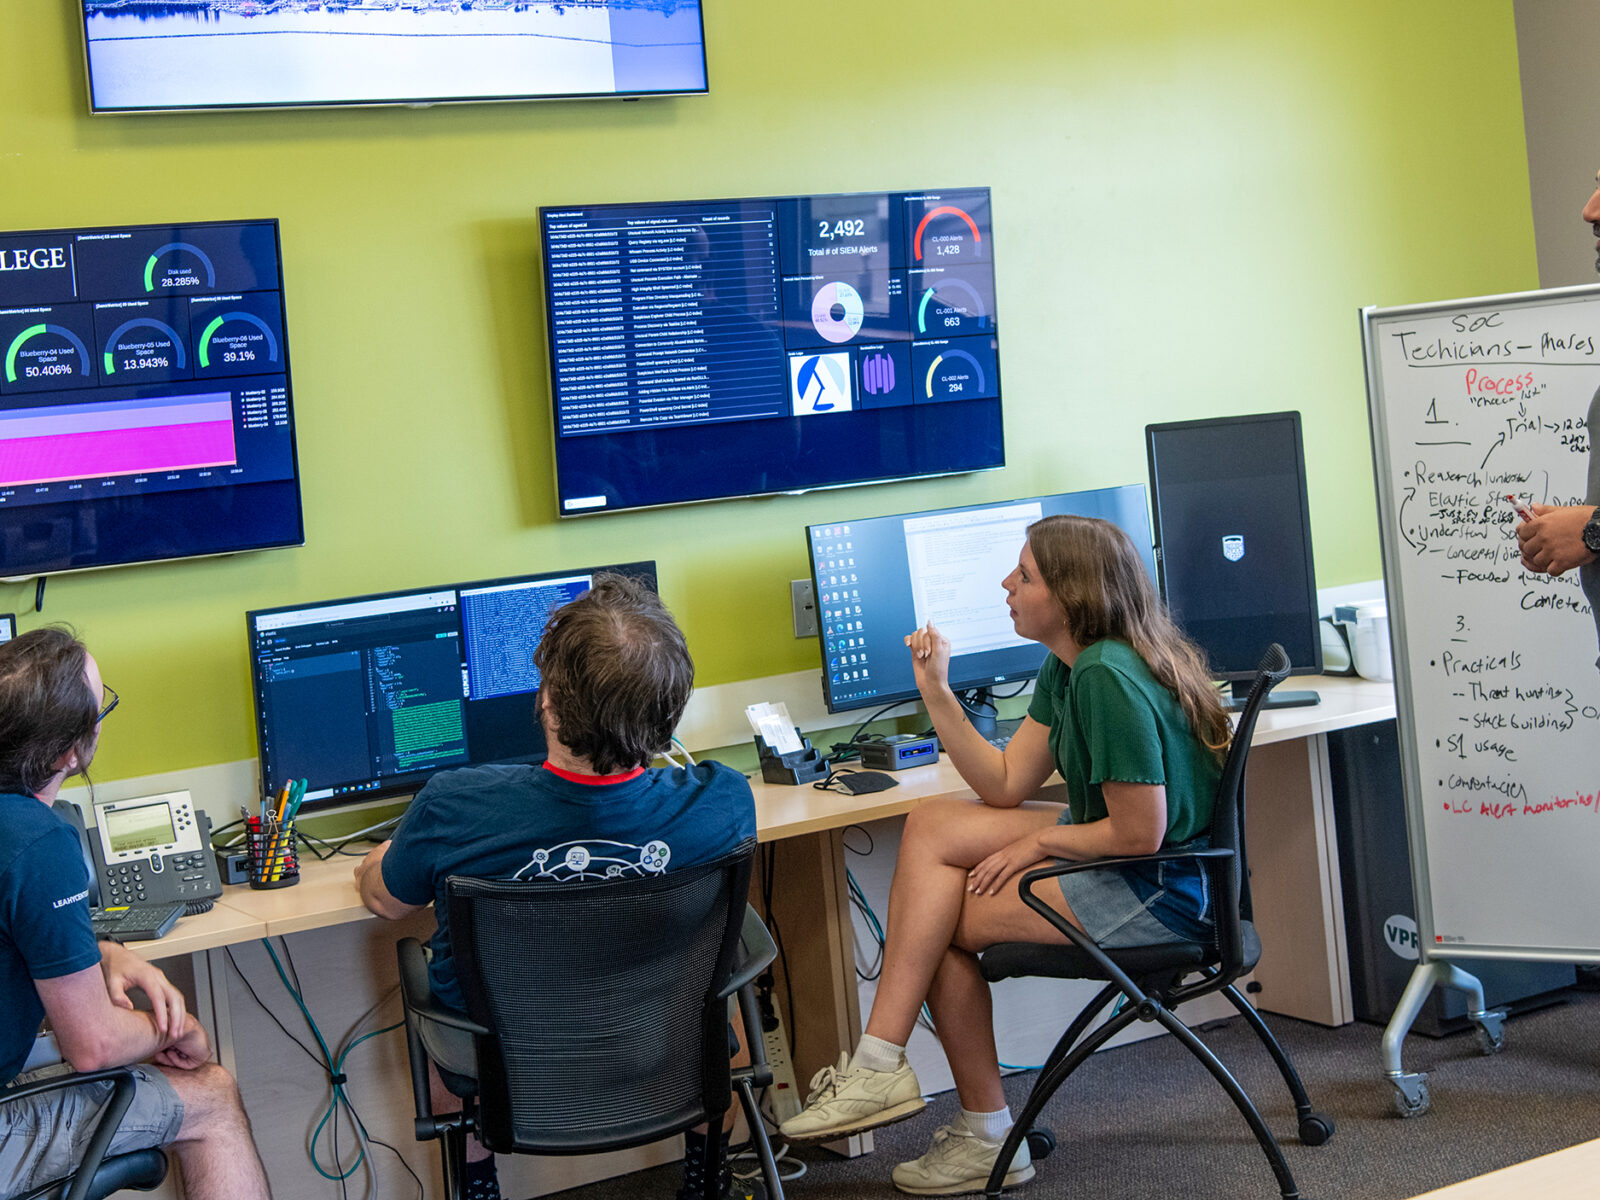 students and professor consider information on large screens